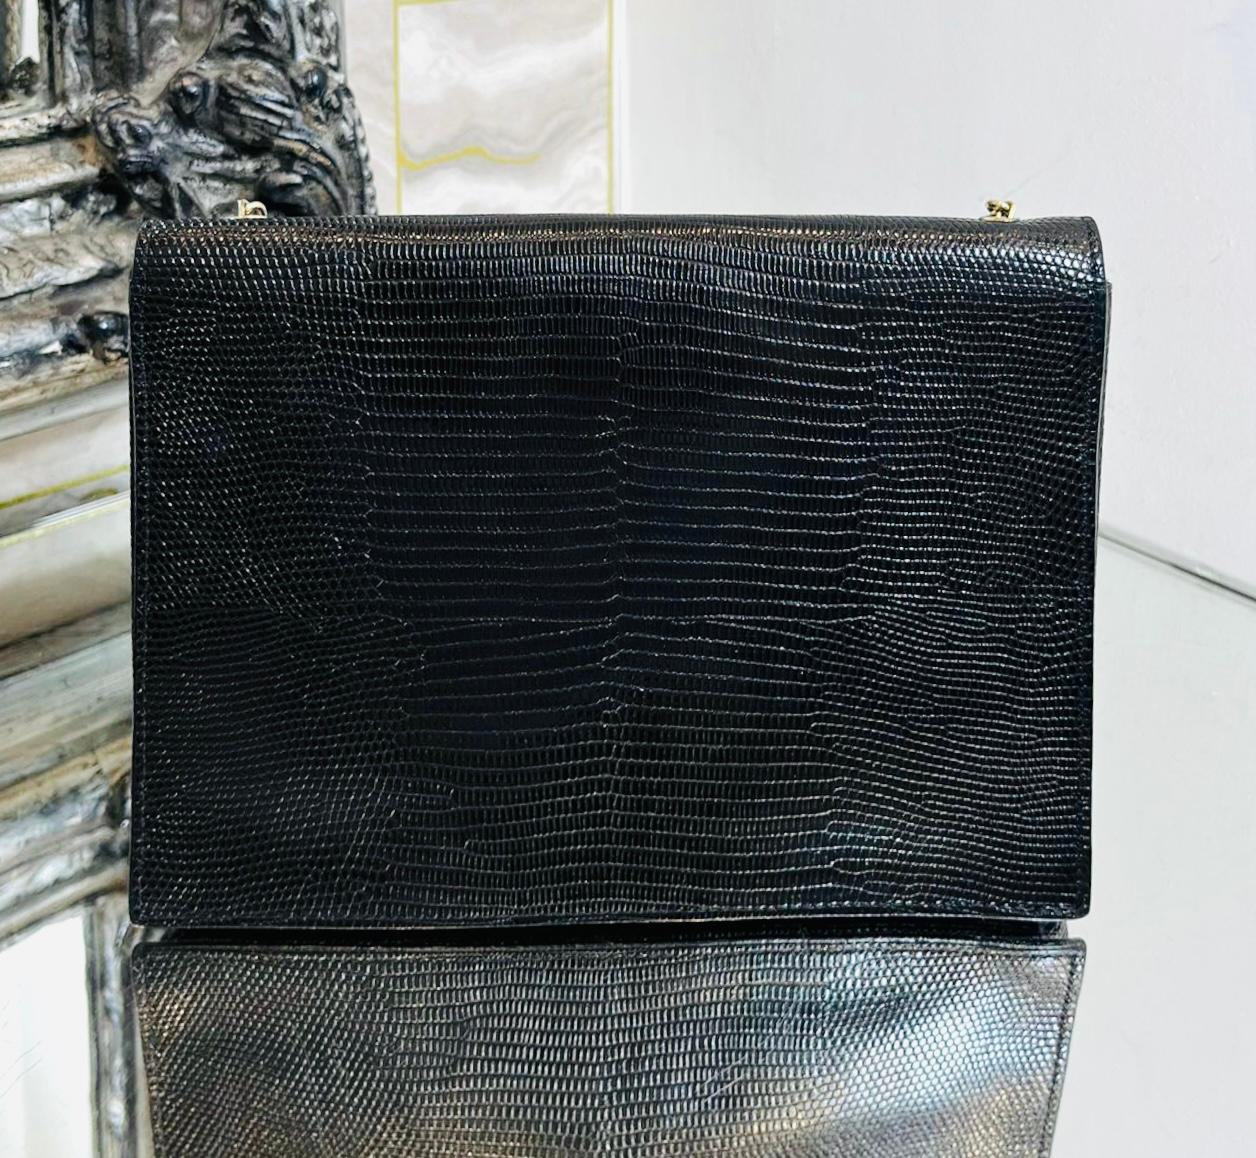 Black Fendi Lizard Embossed Leather Wallet/Bag On Chain For Sale